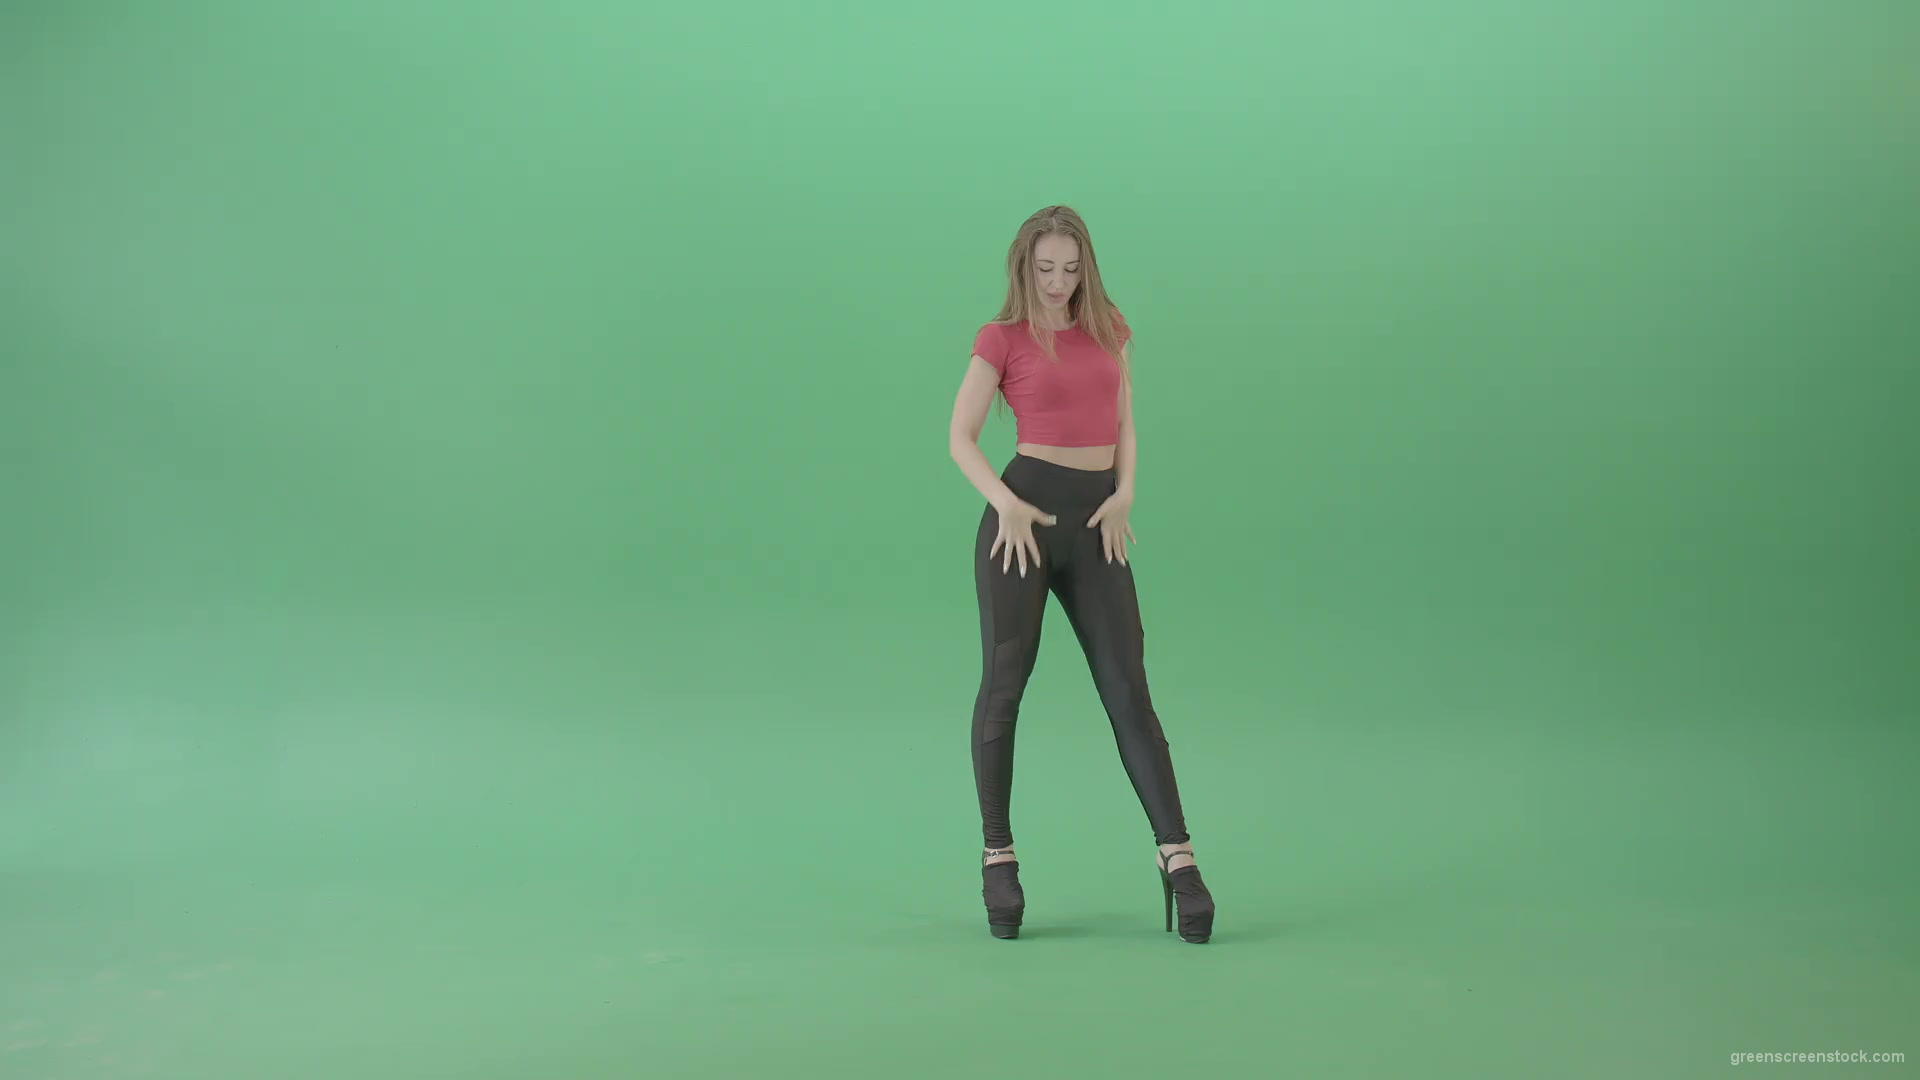 Passion-sexy-girl-on-green-screen-in-red-posing-strip-dance-4K-Video-Footage-1920_001 Green Screen Stock